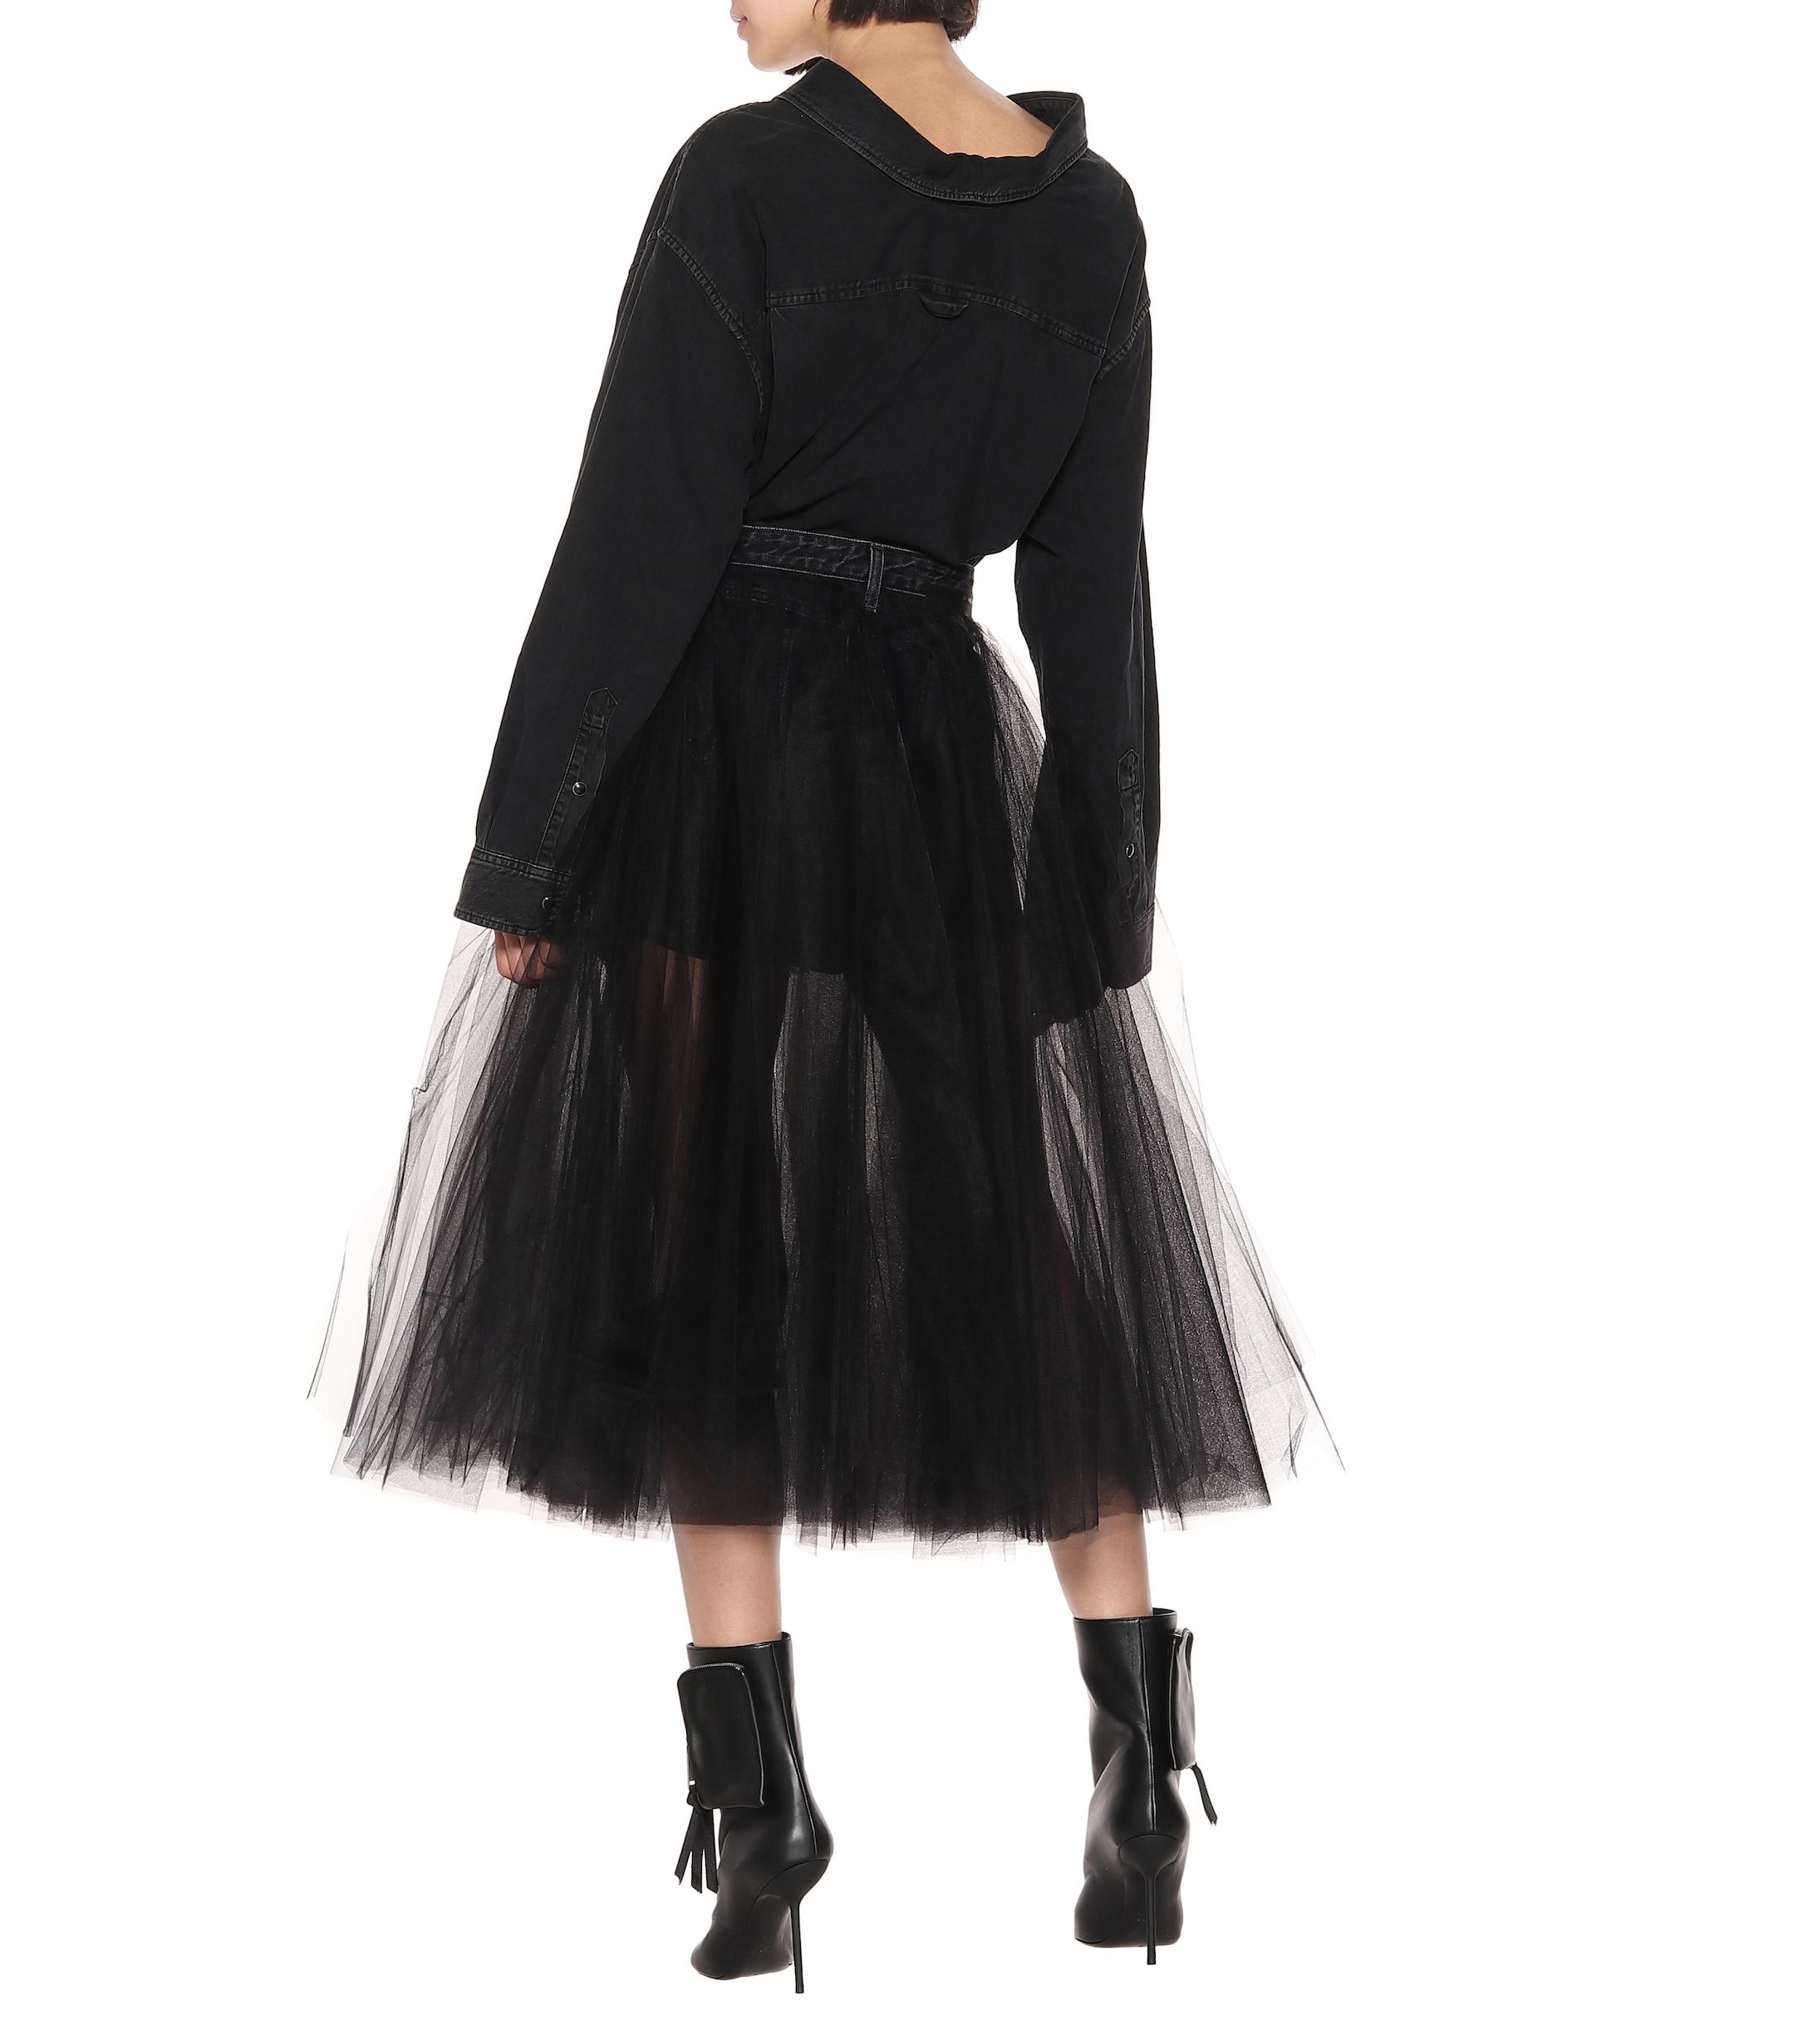 Unravel Project Denim And Tulle Skirt in Black - Lyst